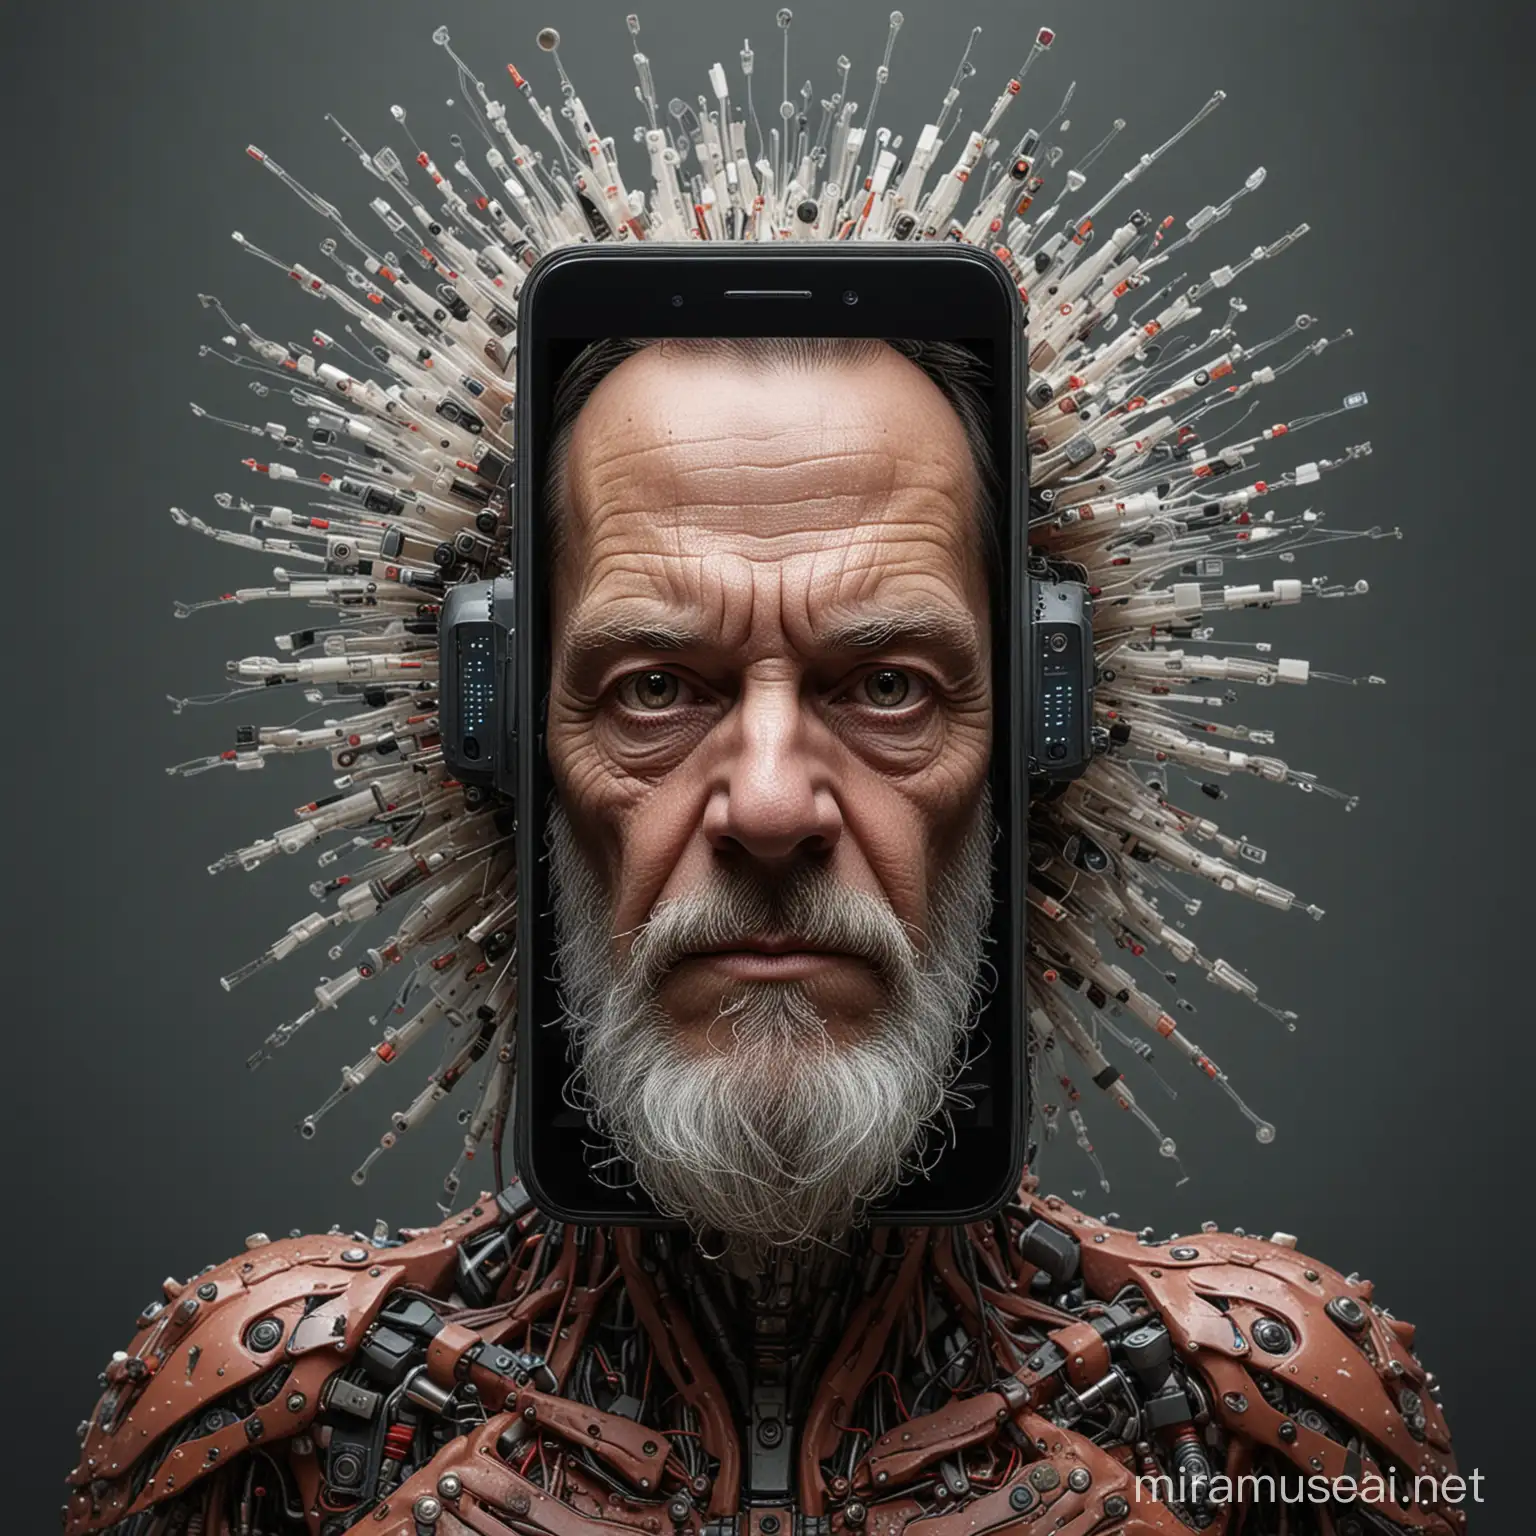 direct flash photography photo of '' A Portrait of fictional creature made of smartphones combined in unexpected ways''. Insanely detailed, Professional work. 